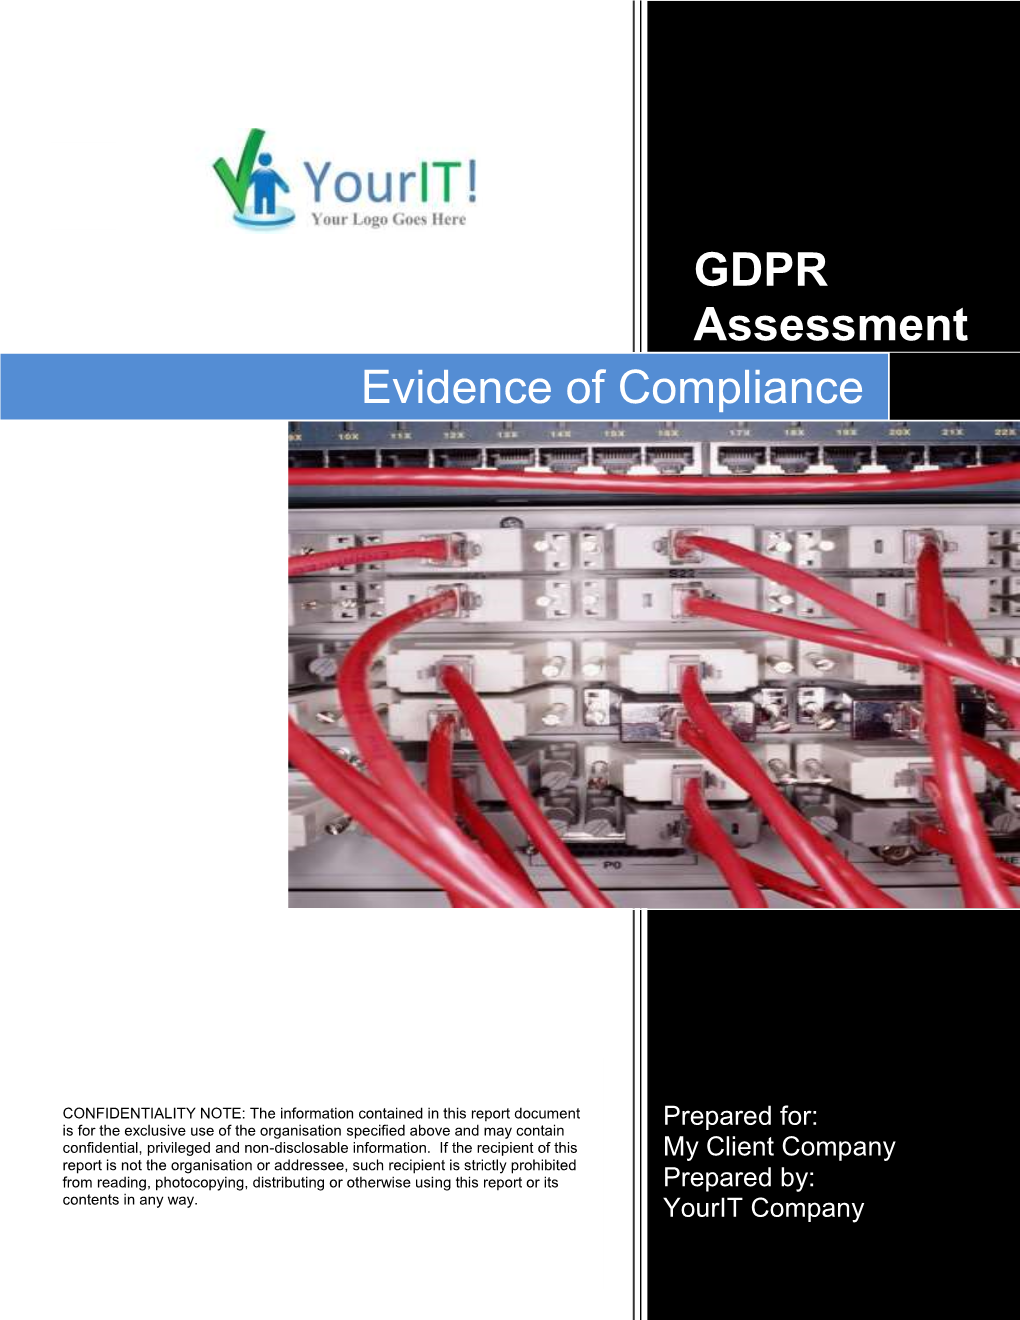 GDPR Assessment Evidence of Compliance